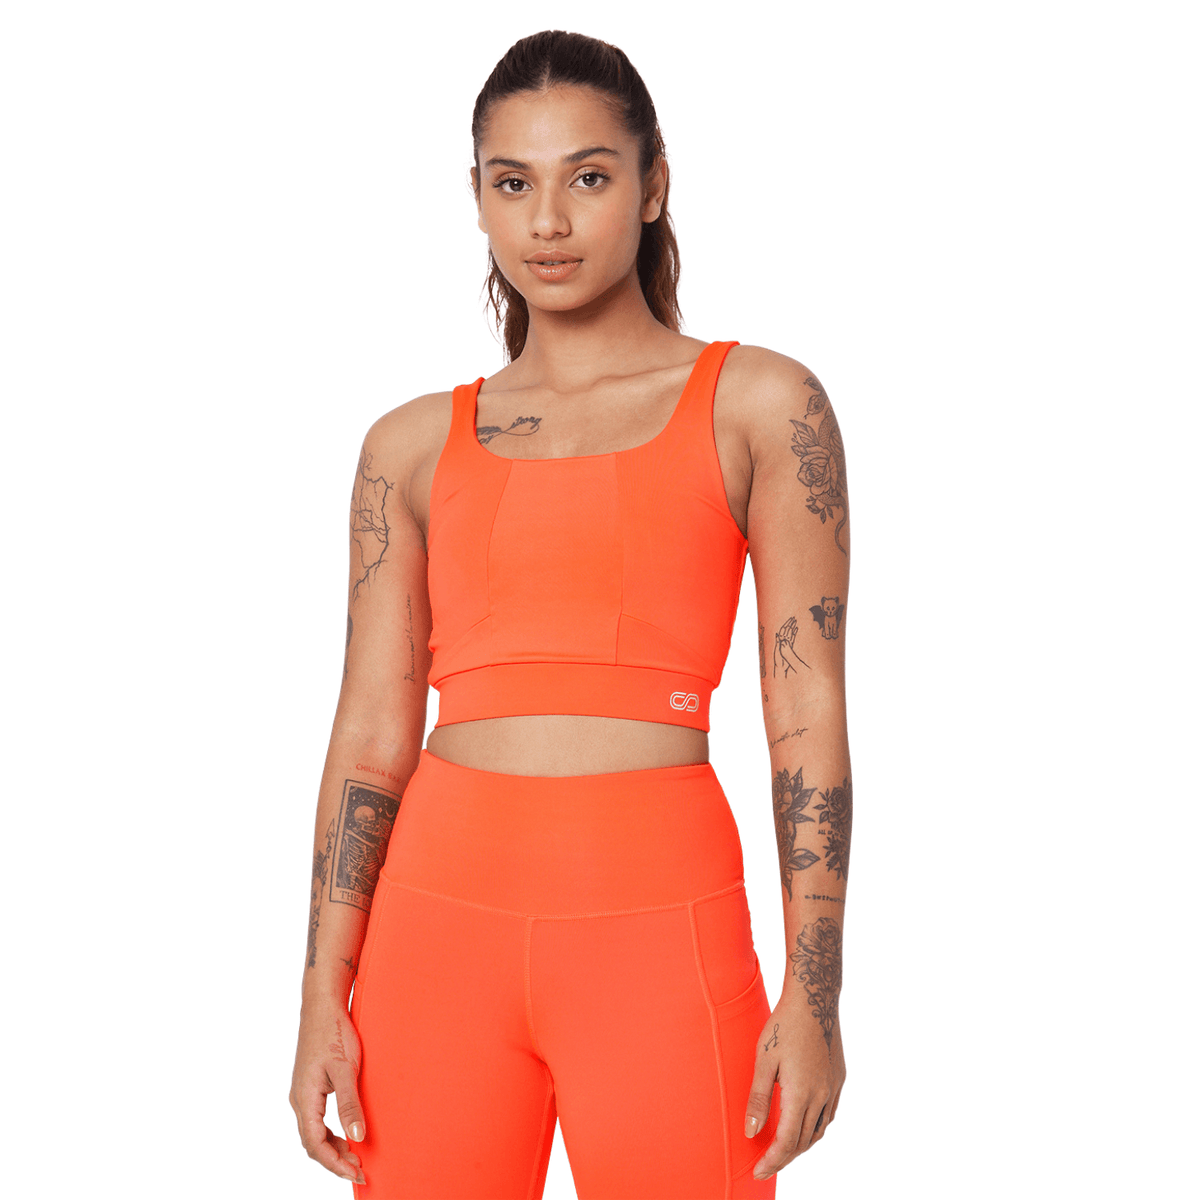 Evolve Padded Crop Top Fiery Coral-Padded Crop Top-Silvertraq-Fiery Coral-XS-Silvertraq